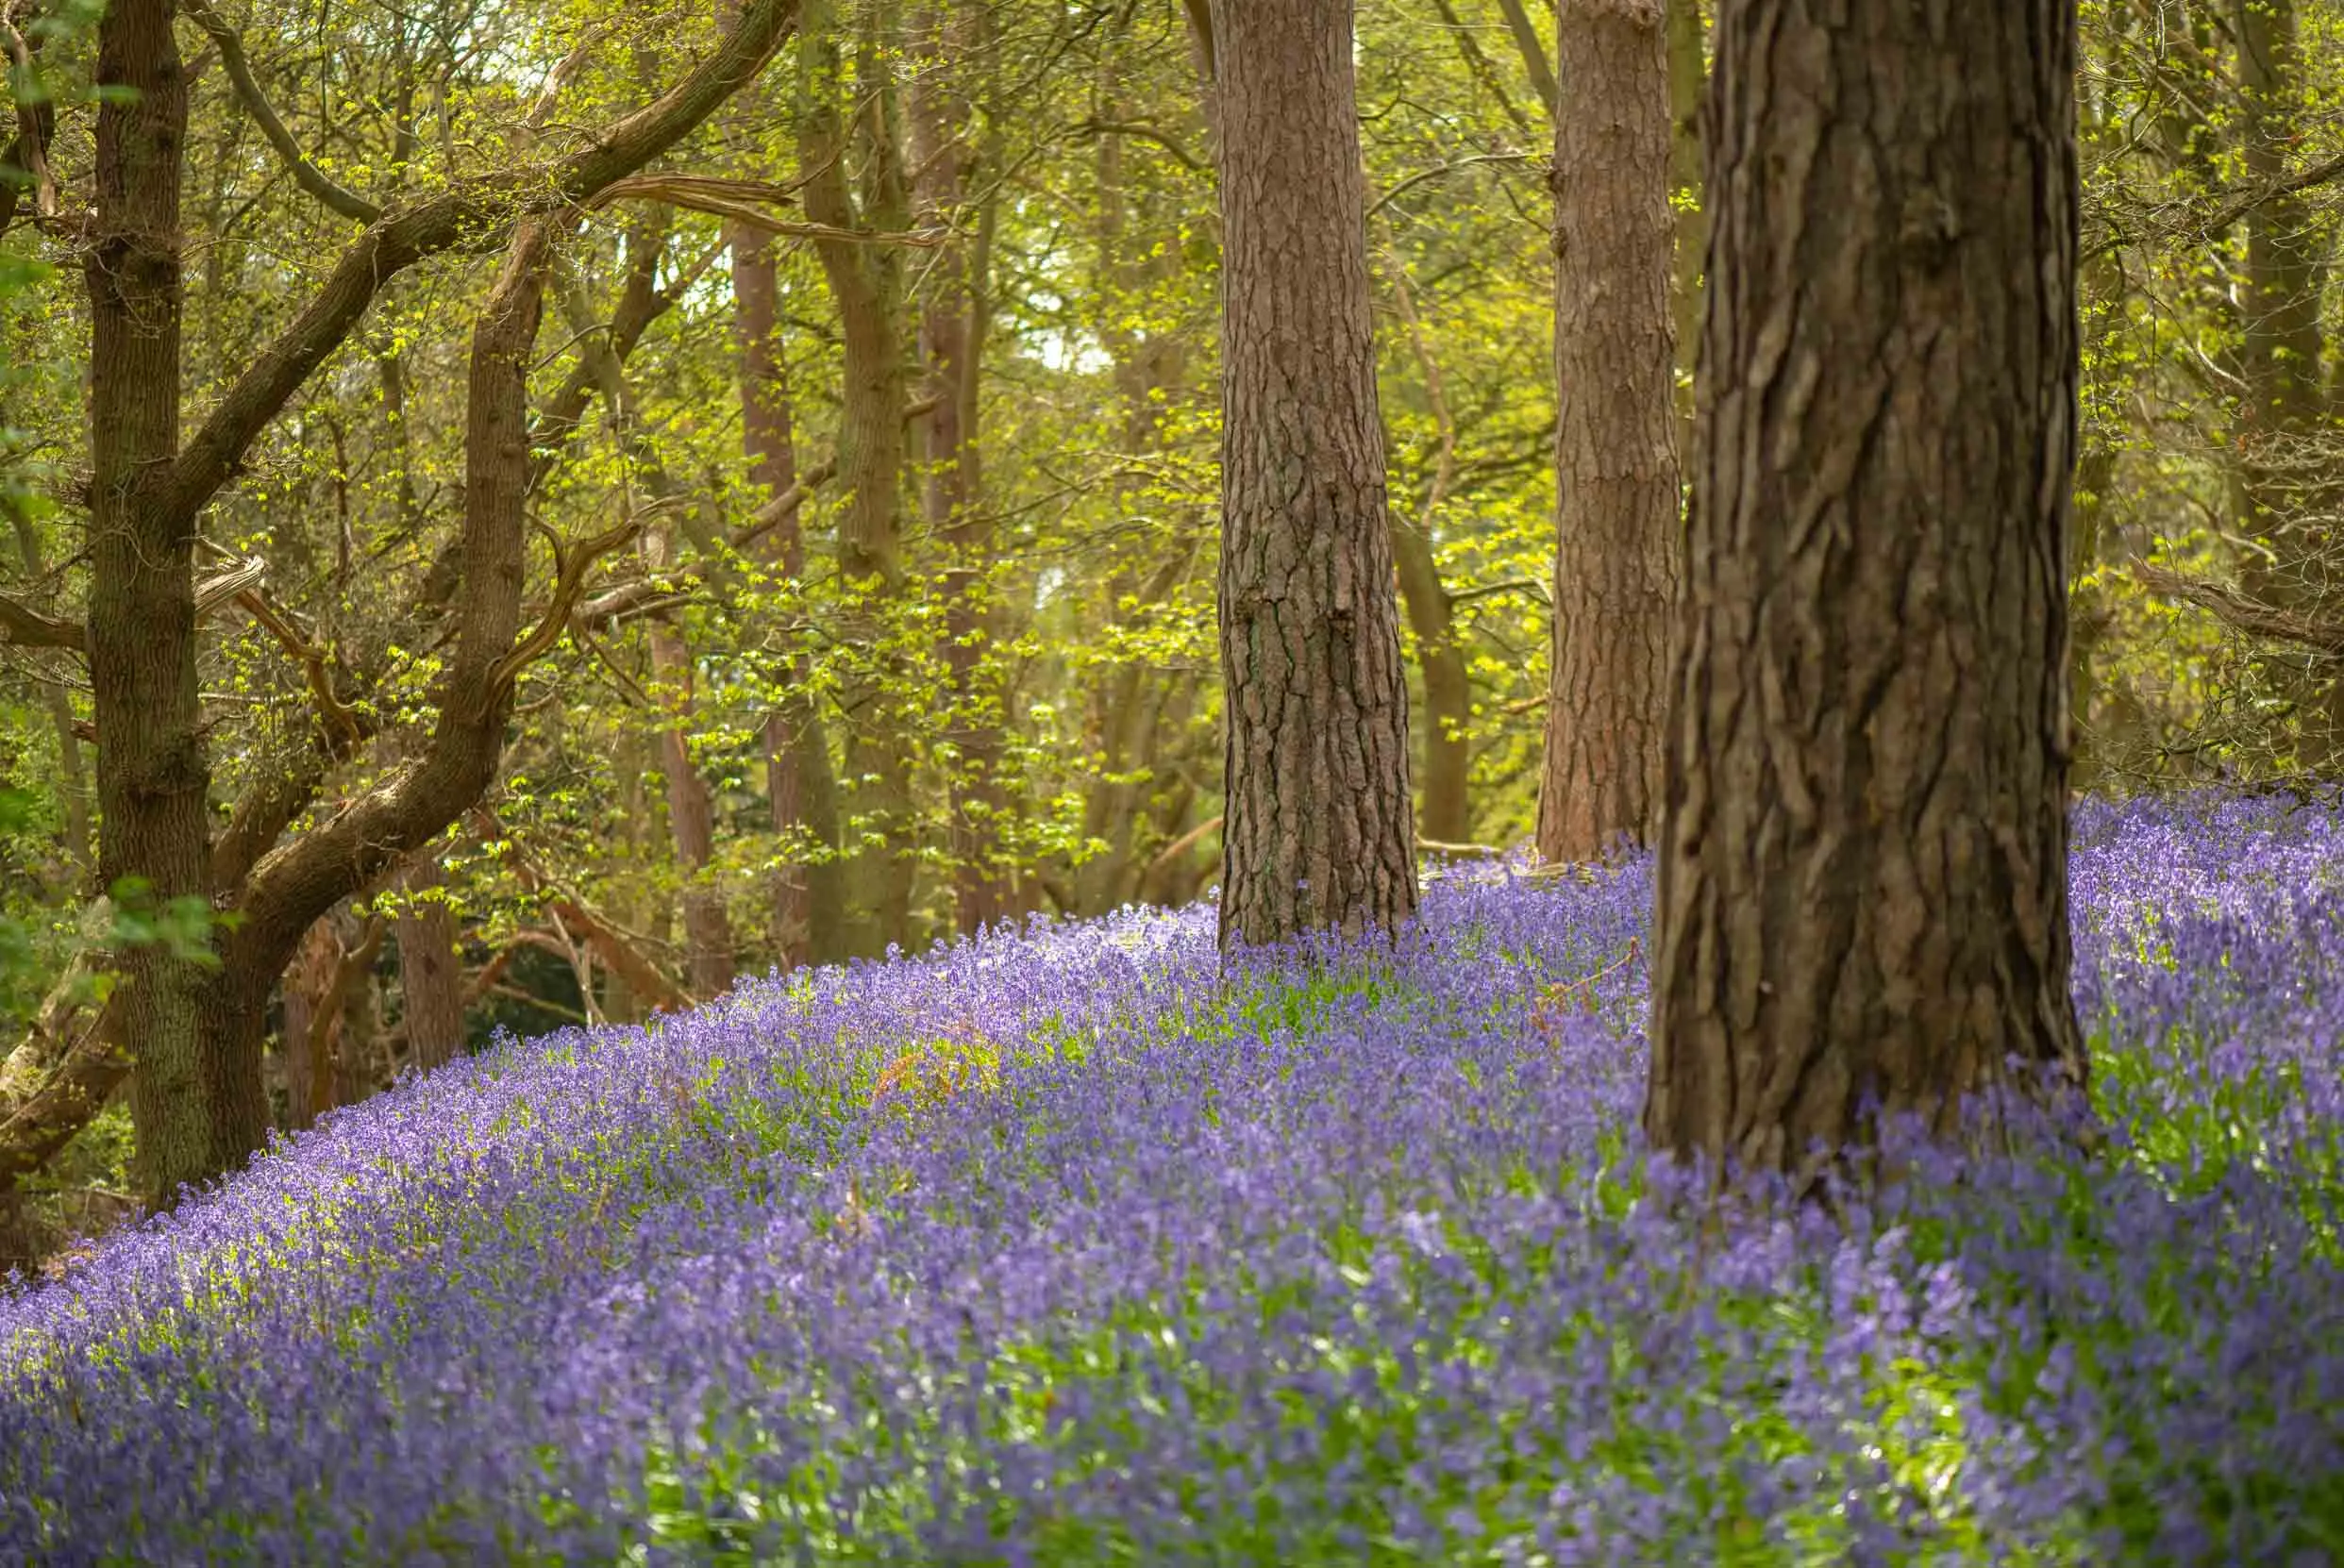 Purple flowering Bluebells cover the woodland floor of The Lodge.